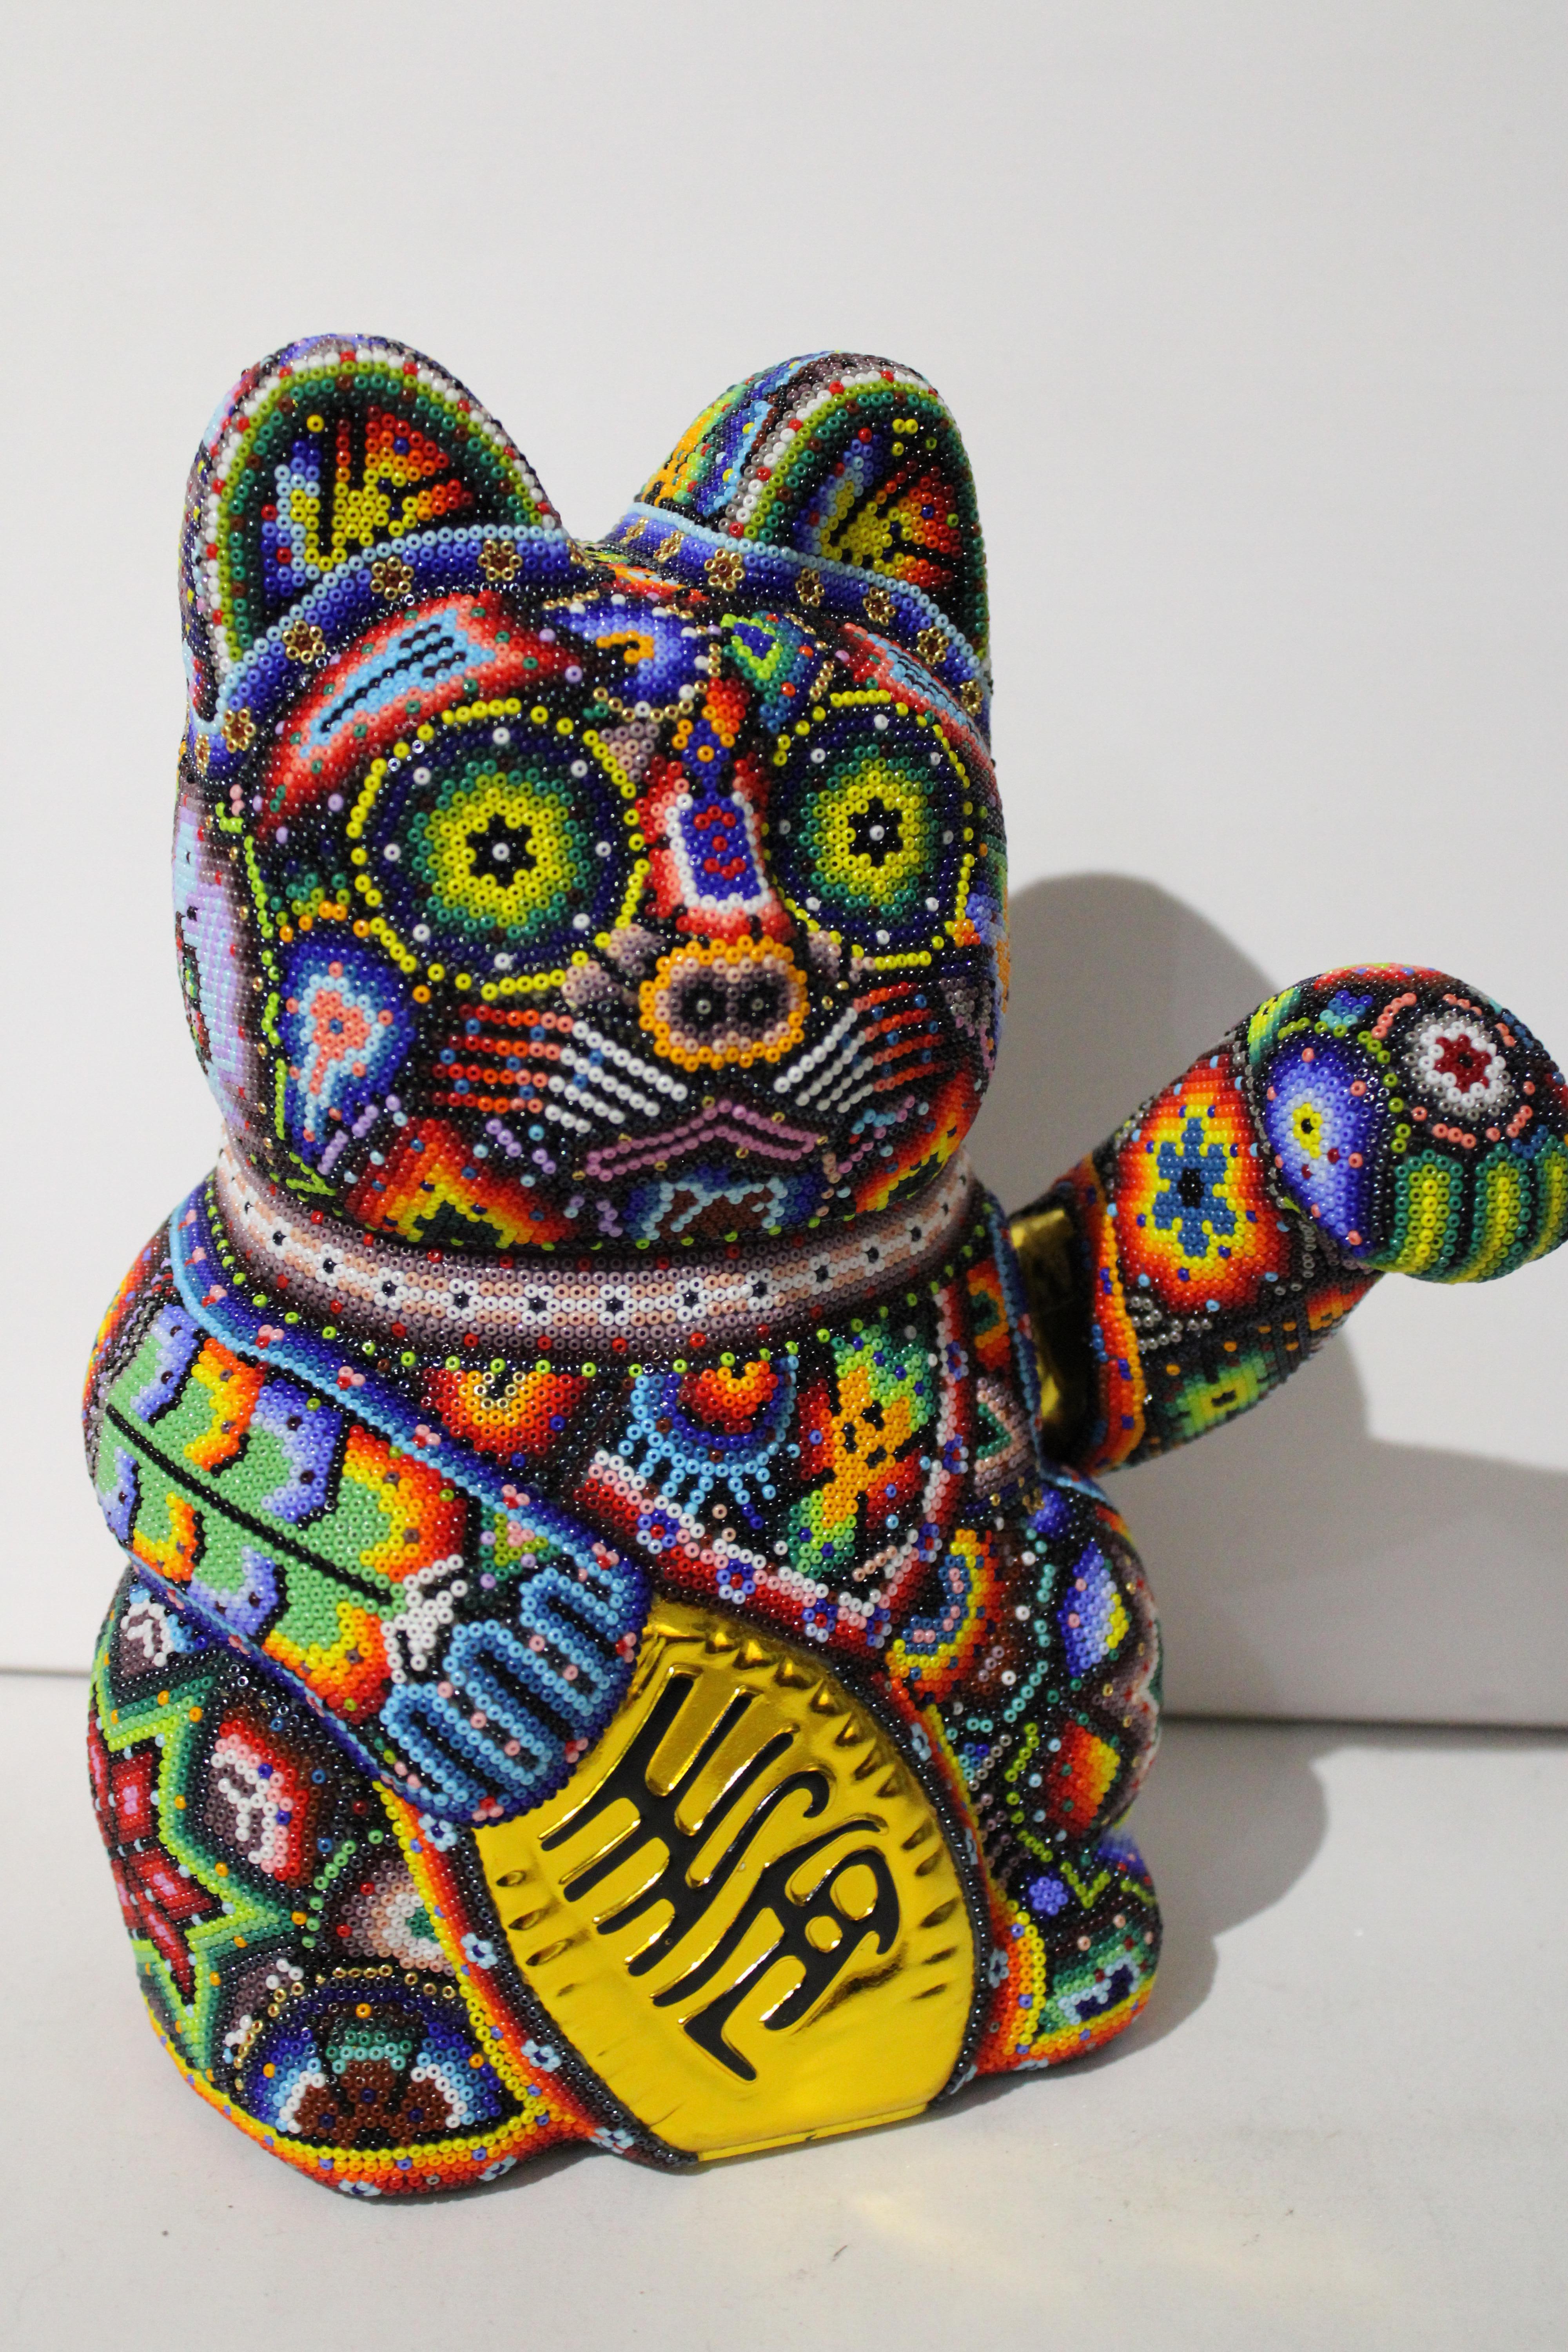 Money Cat from Huichol ALTERATIONS Series - Sculpture by CHROMA aka Rick Wolfryd 